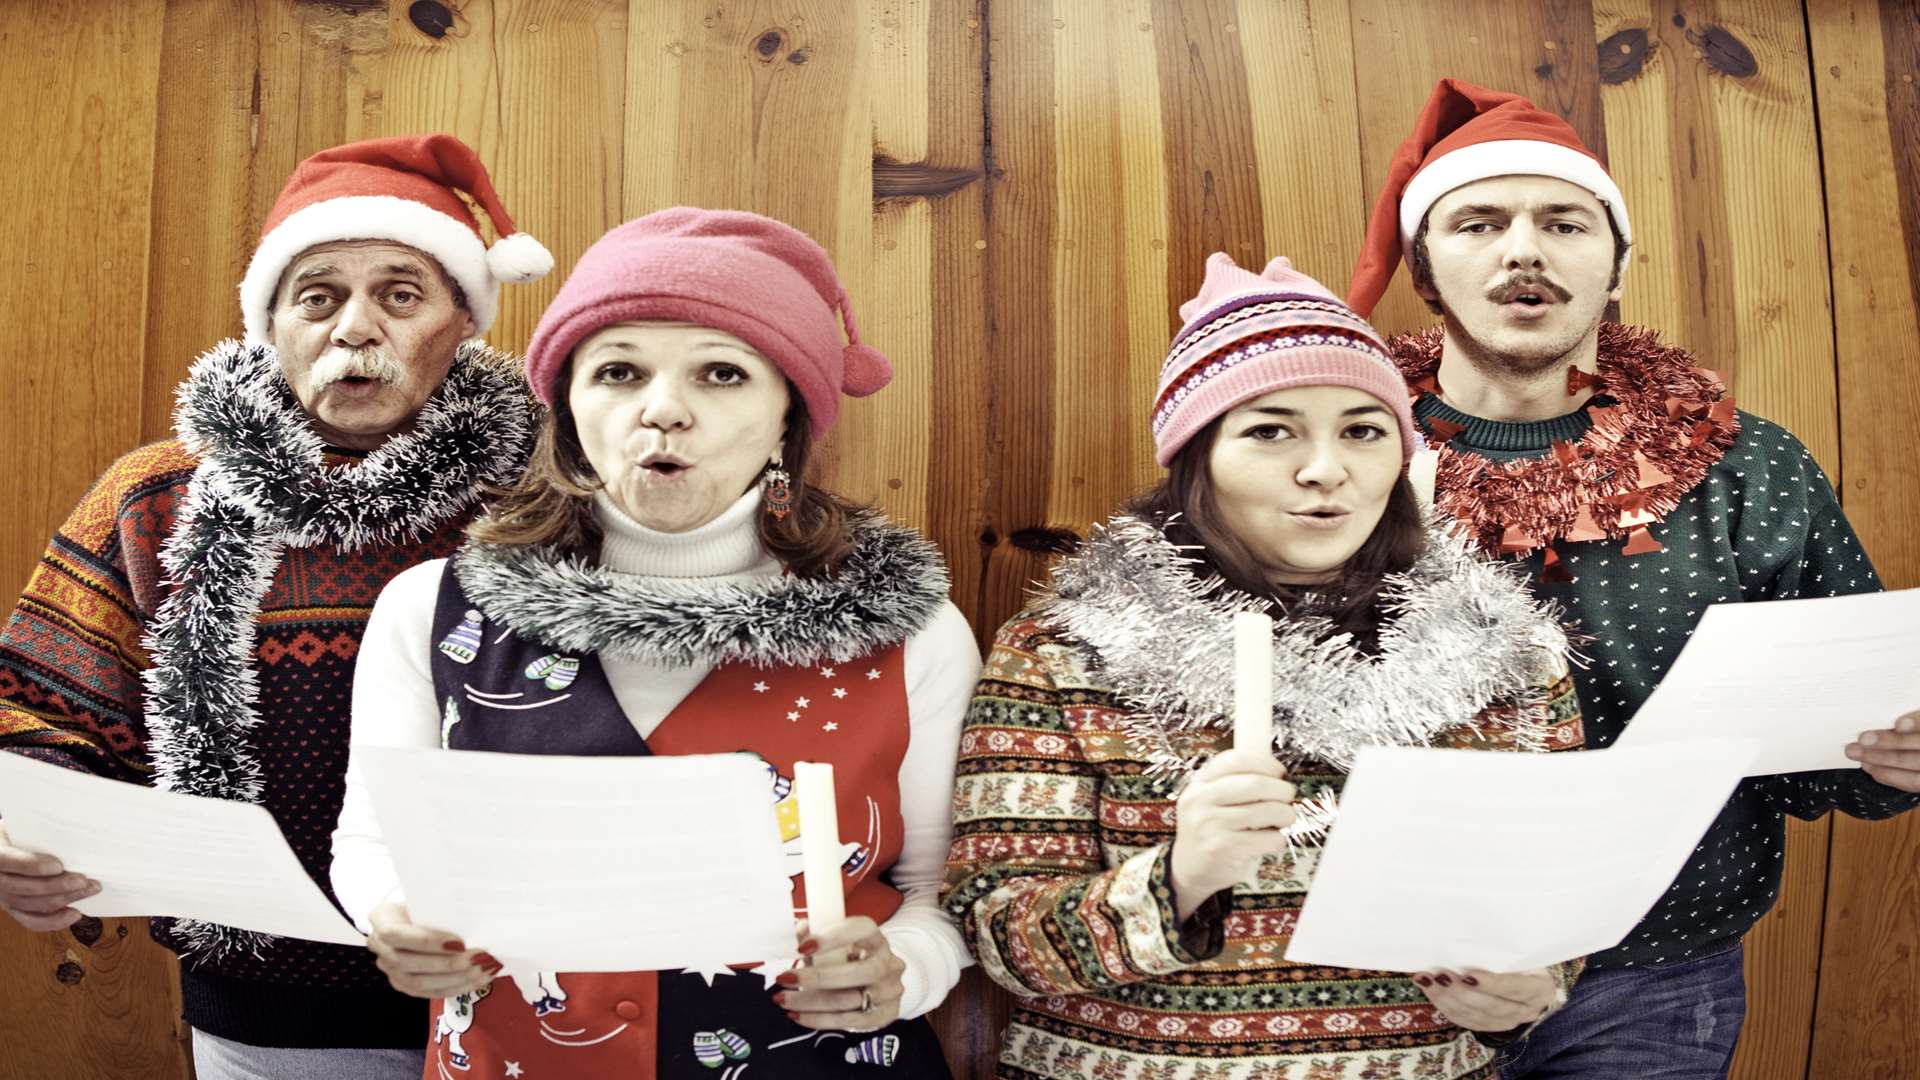 Choir performances will be included in this year's Santa Saturdays